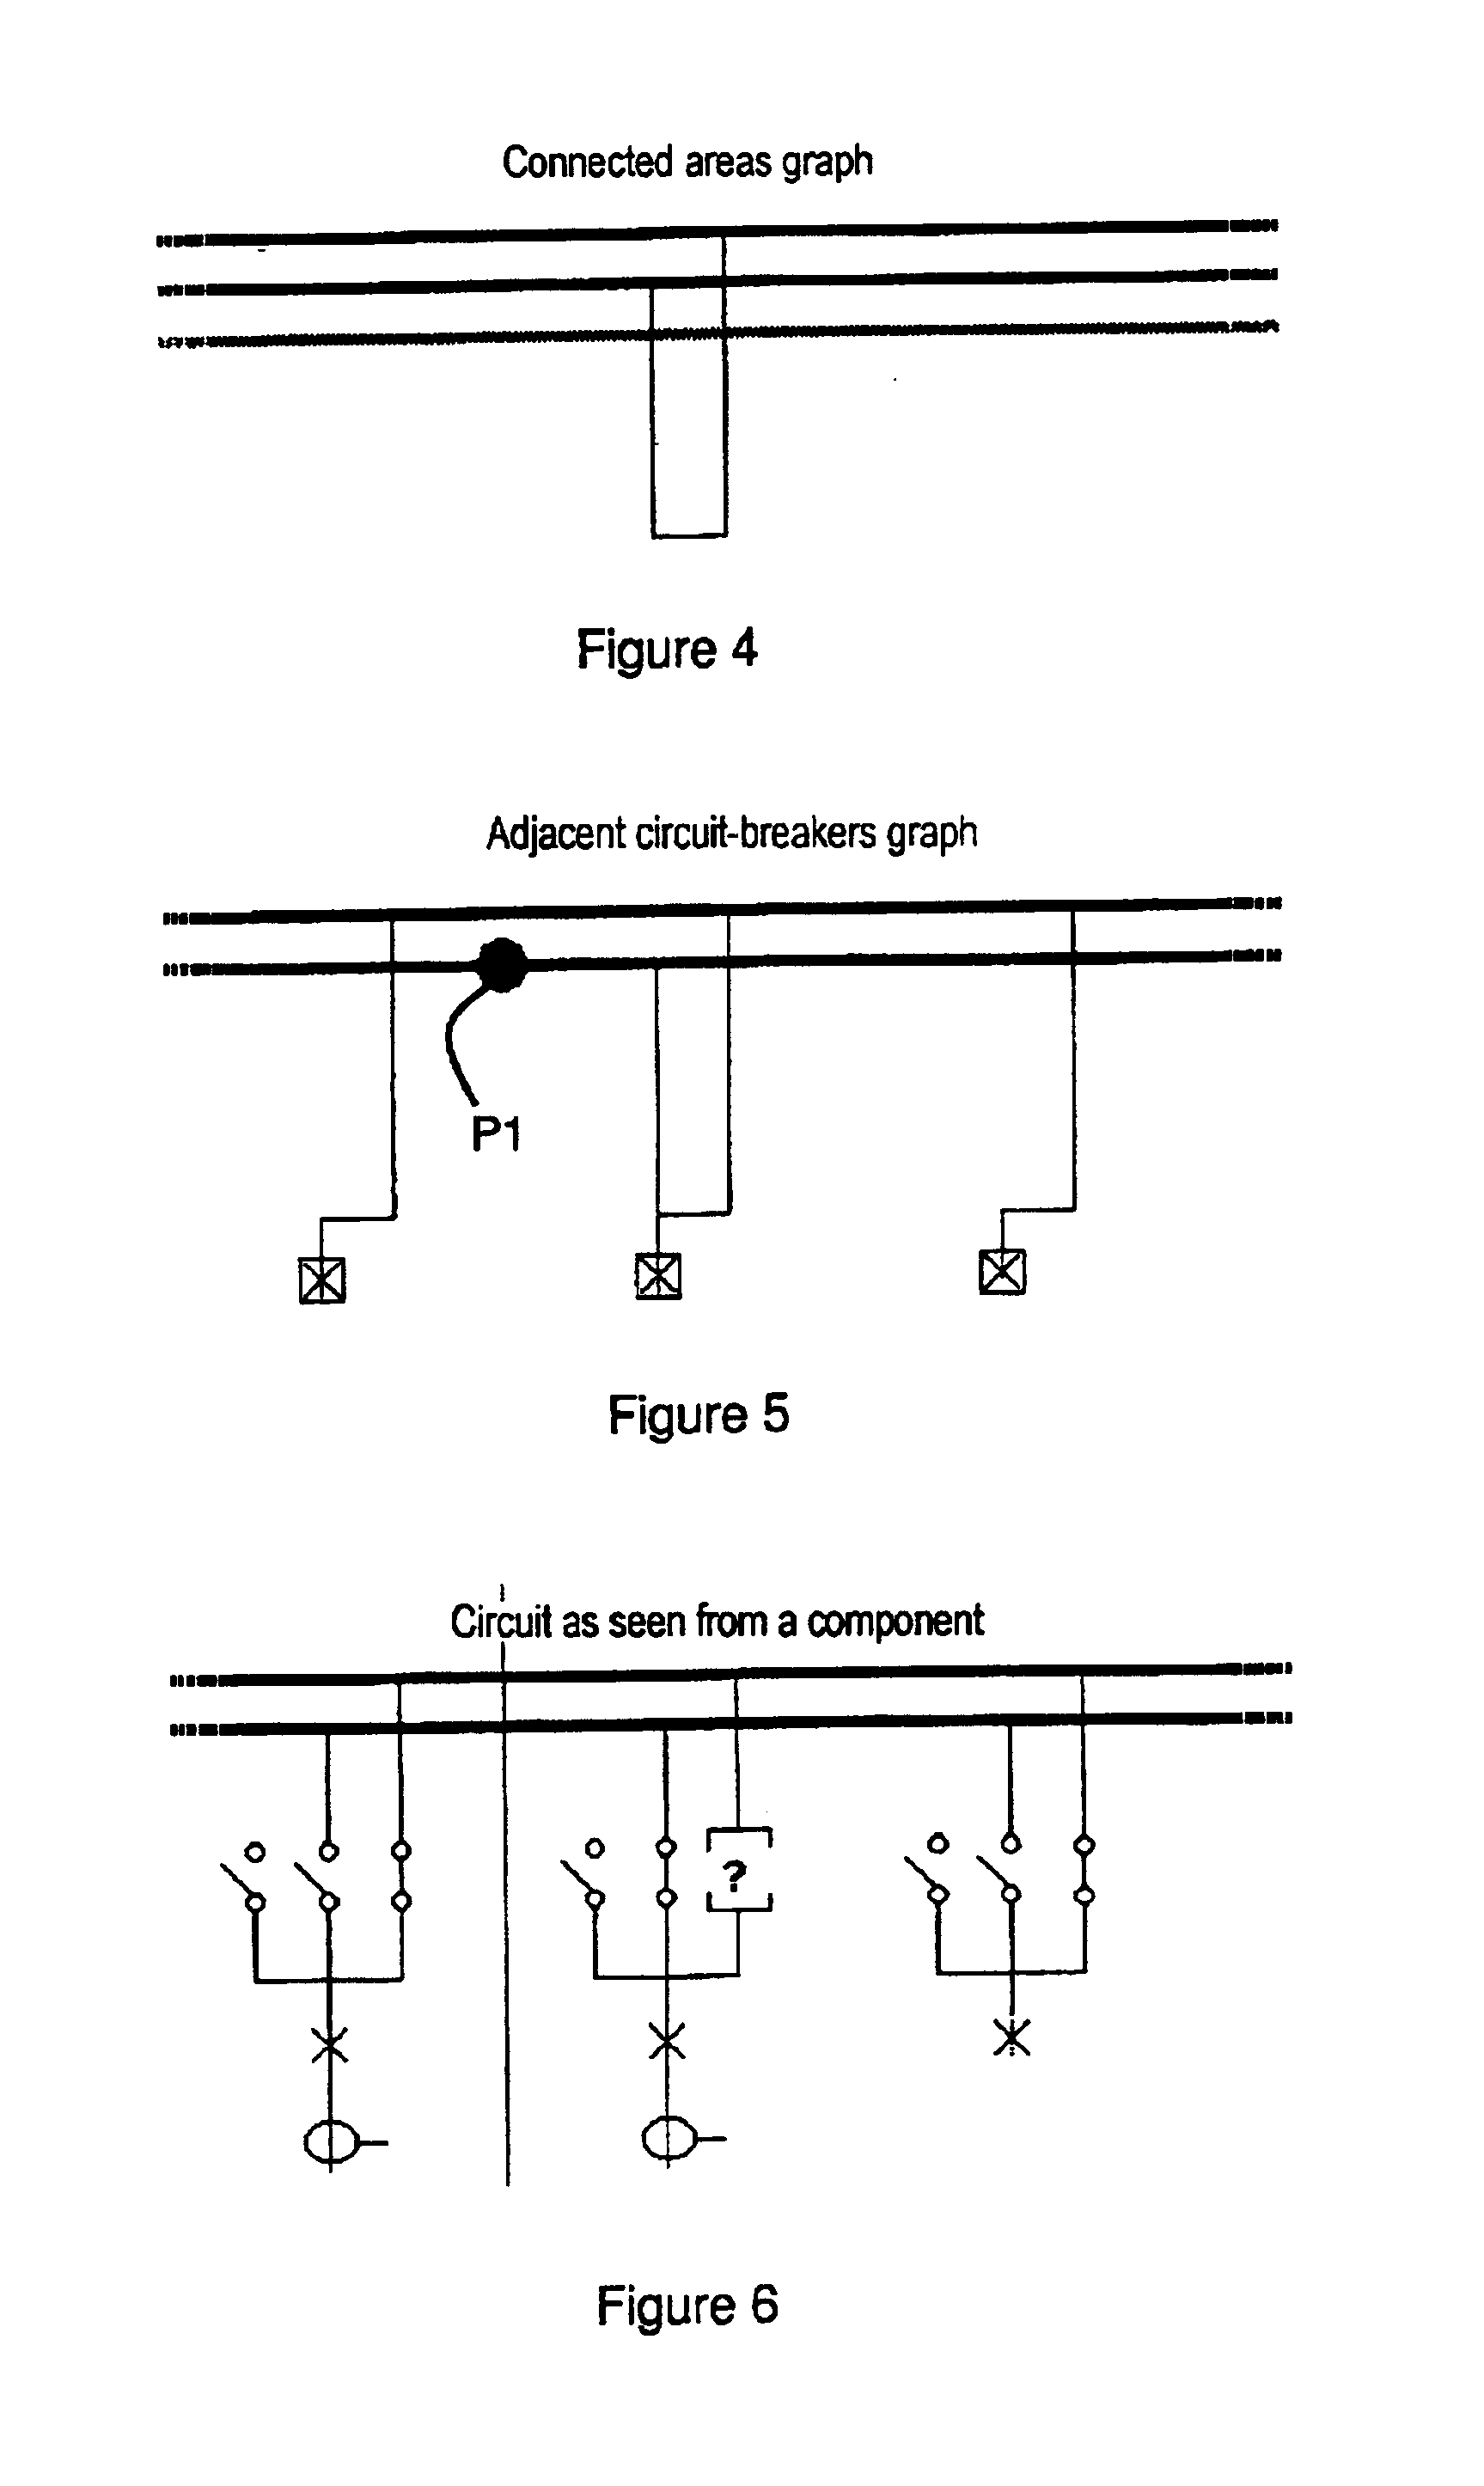 Process for initializing and updating the topology of a high-voltage or medium-voltage electrical power station